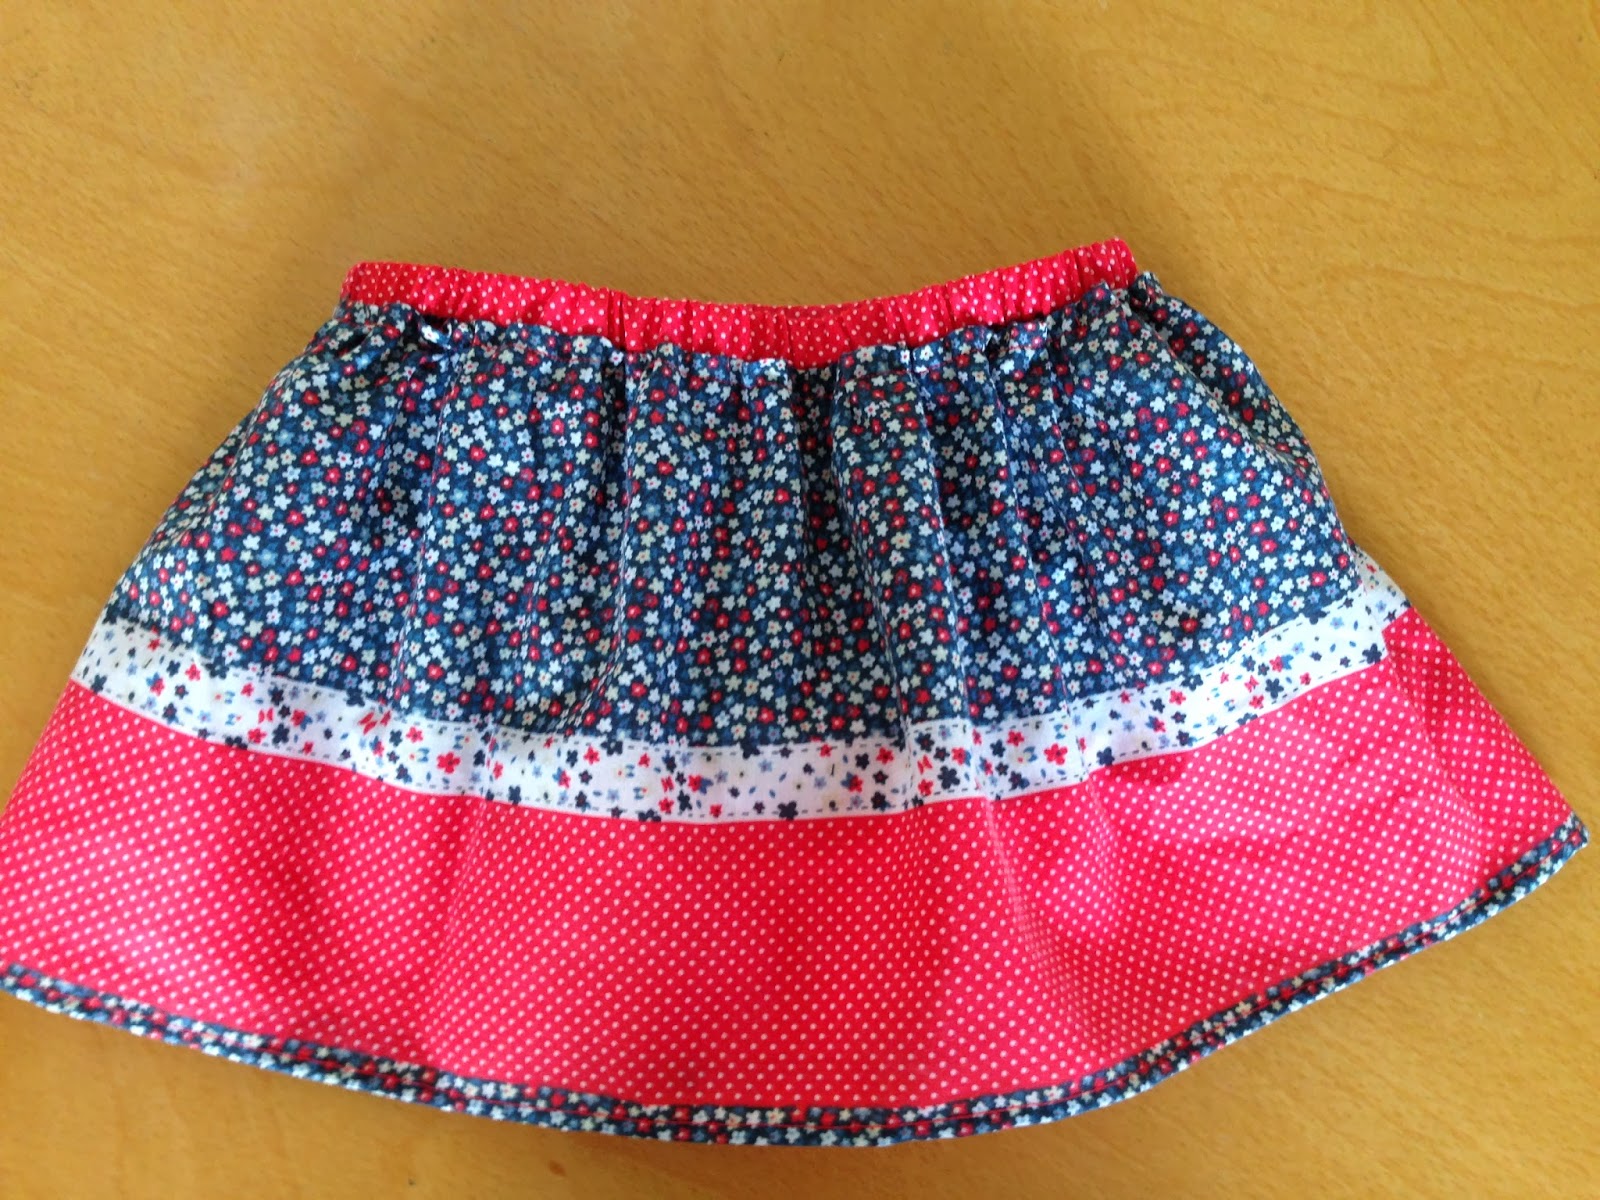 Sewn By Elizabeth: Skirt with built in bloomers